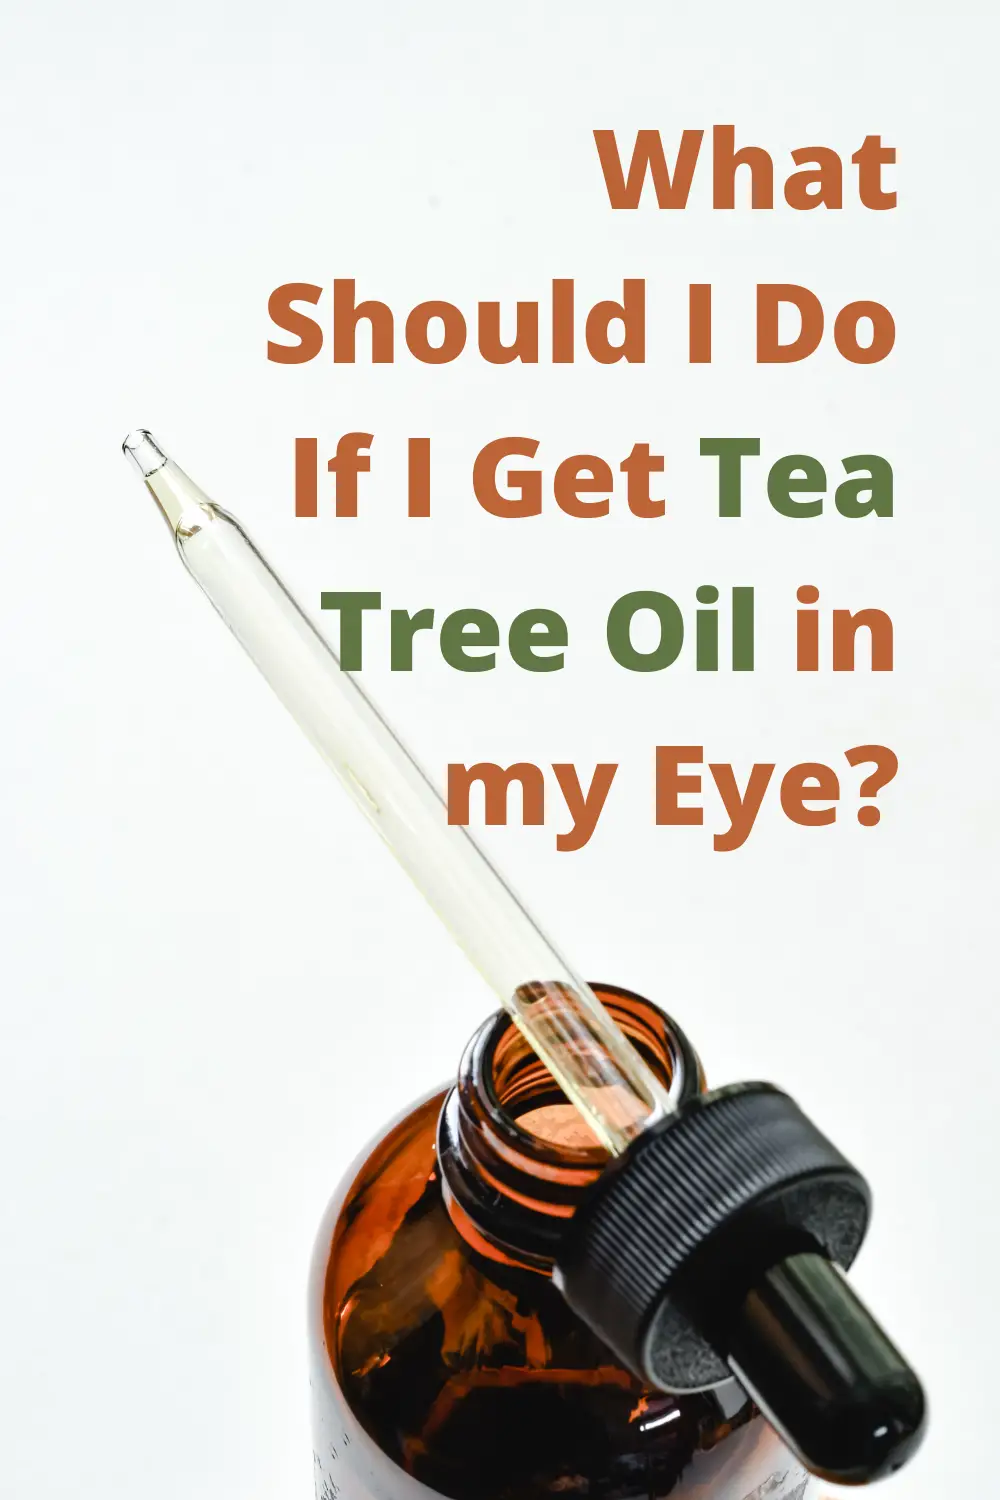 What Should I Do If I Get Tea Tree Oil in my Eye